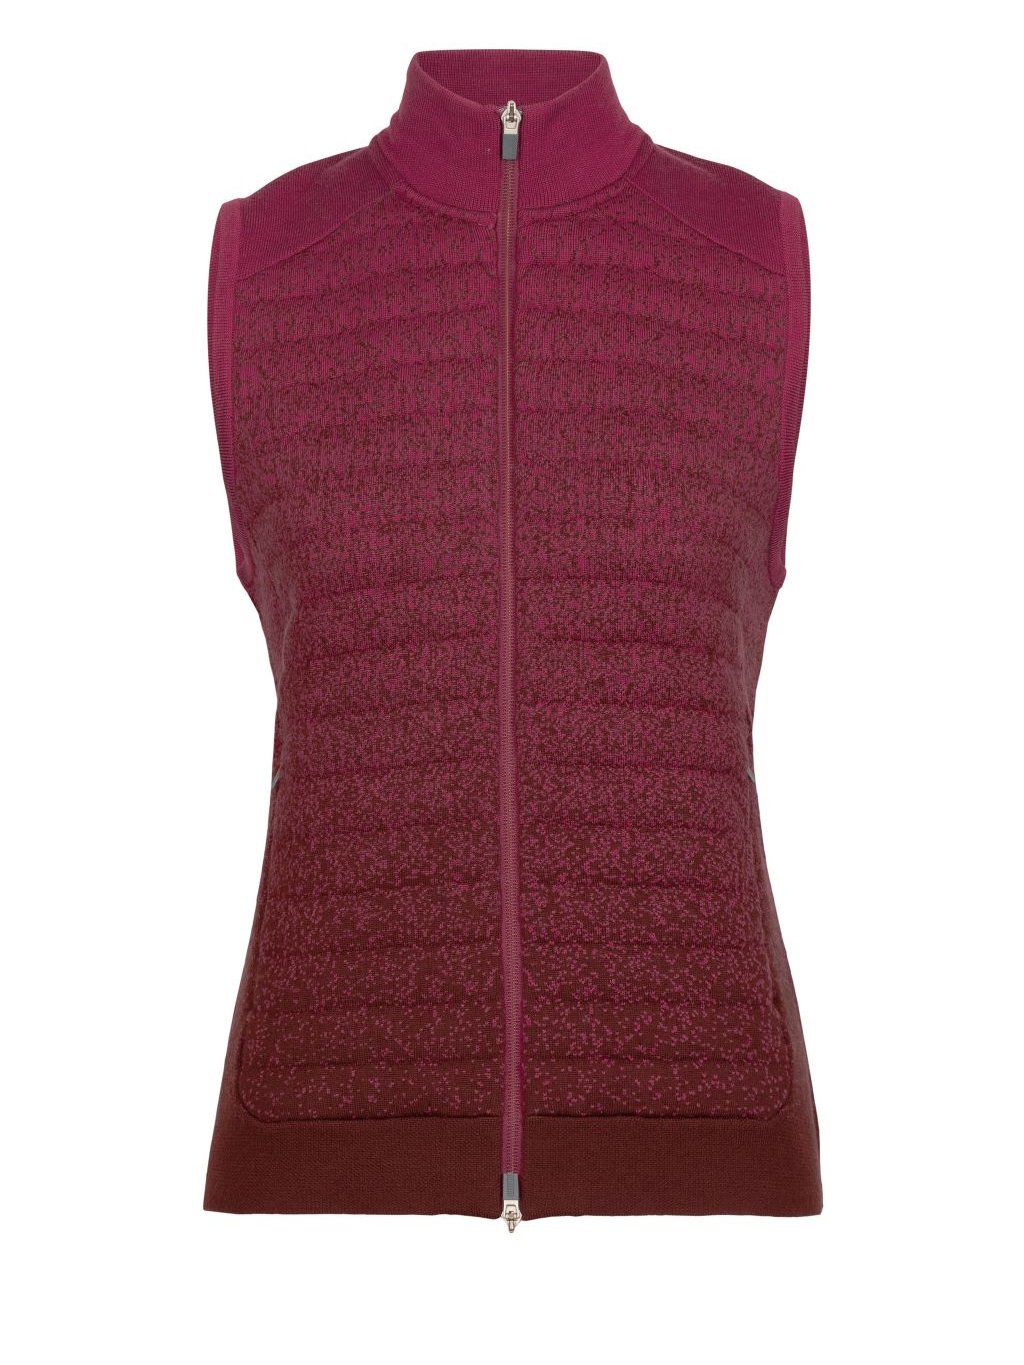 FW22 WOMEN ZONEKNIT INSULATED VEST INTO THE DEEP CHERRY ESPRESSO 0A56M2553